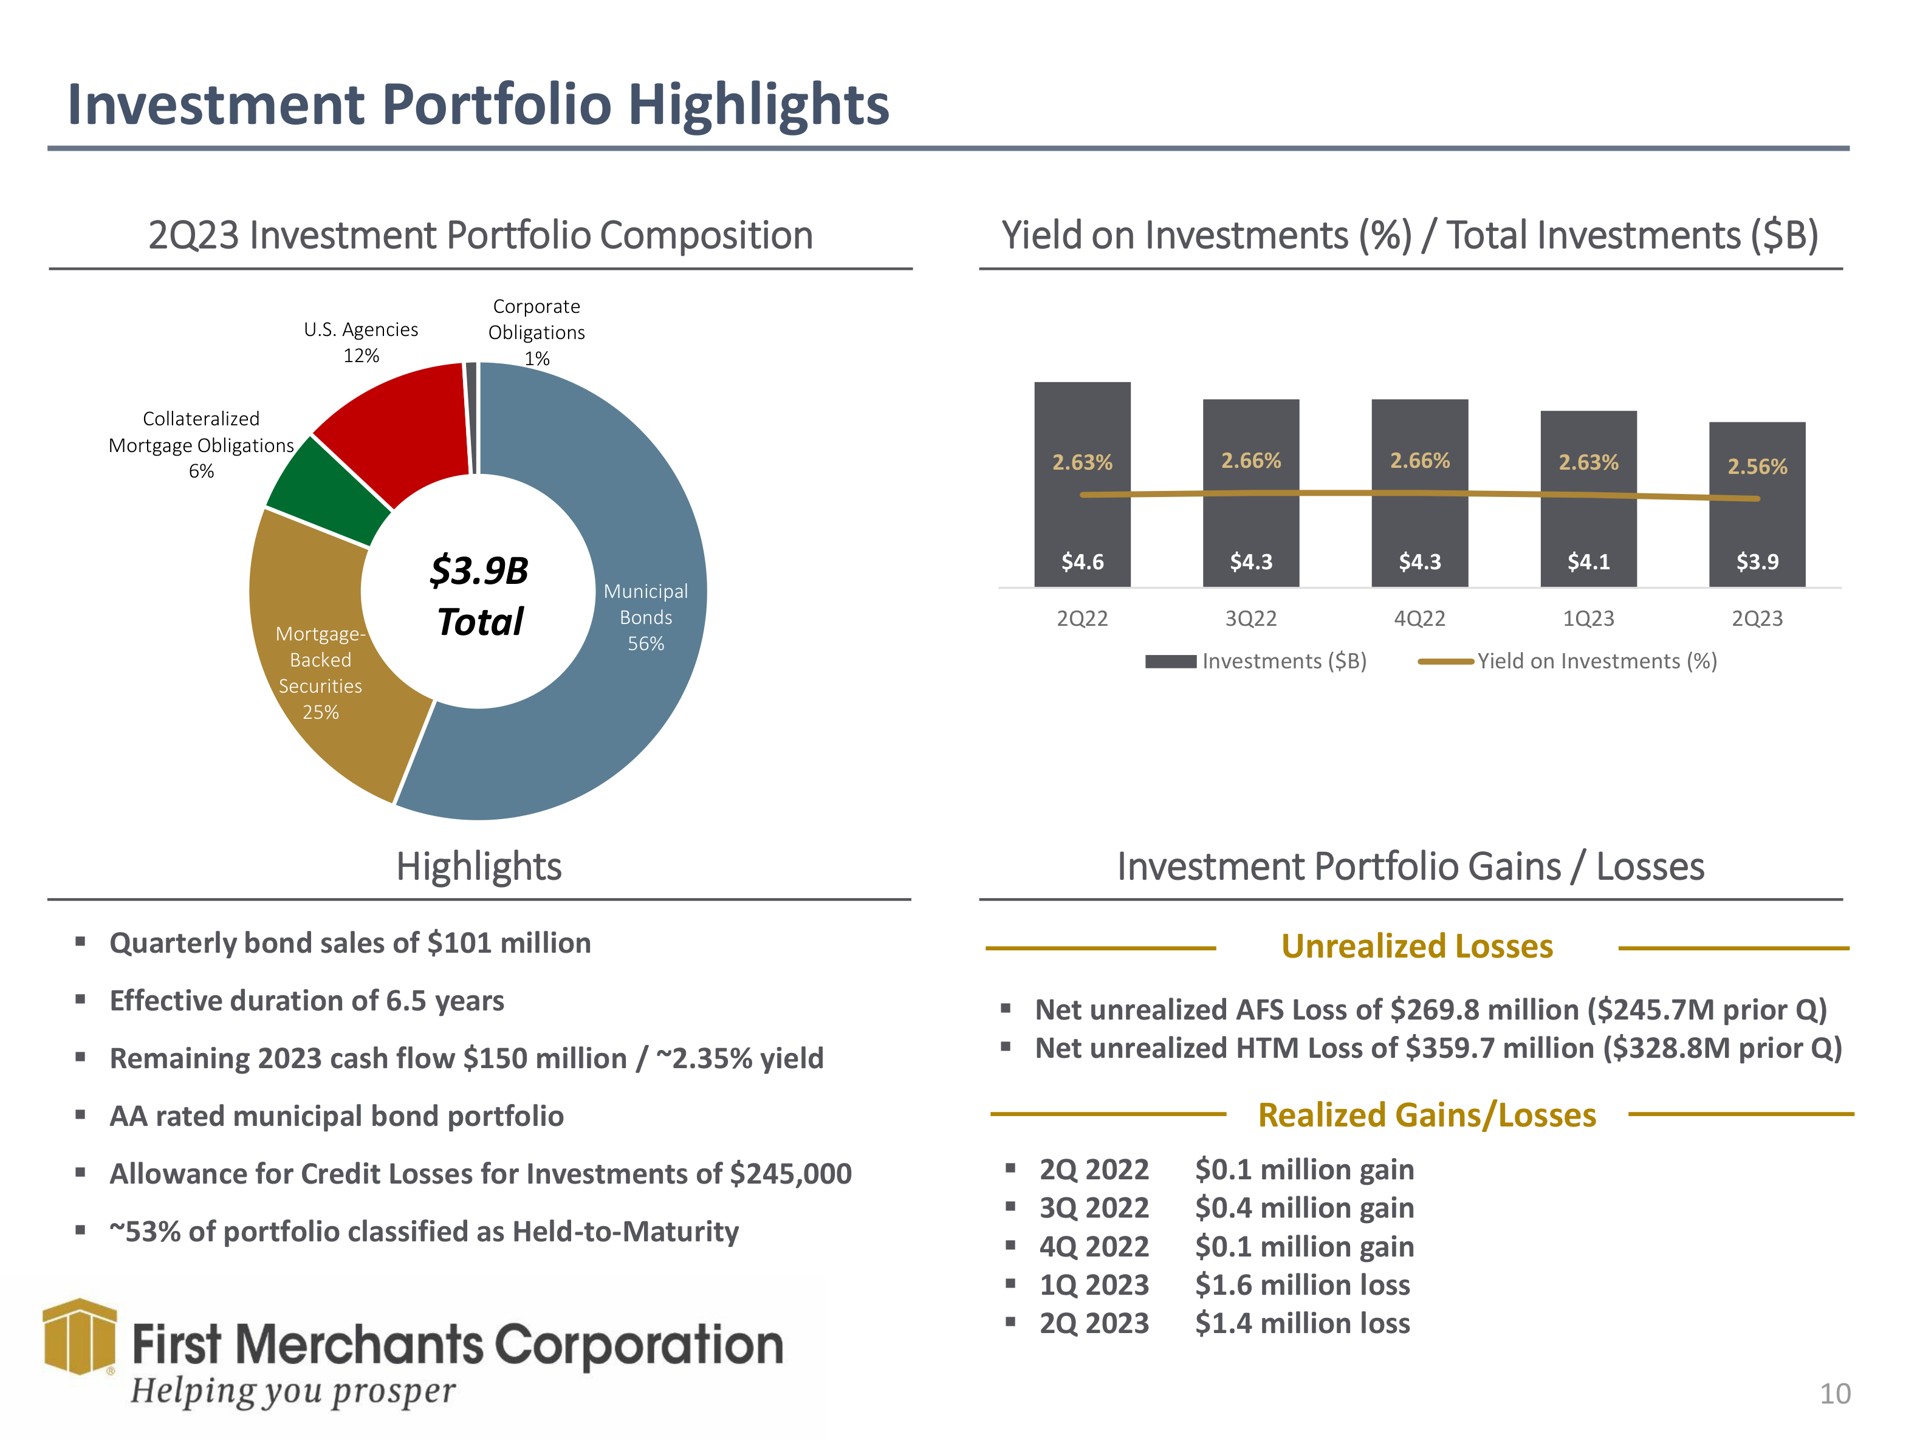 investment portfolio highlights composition yield on investments total investments gains losses first merchants corporation helping you prosper | First Merchants